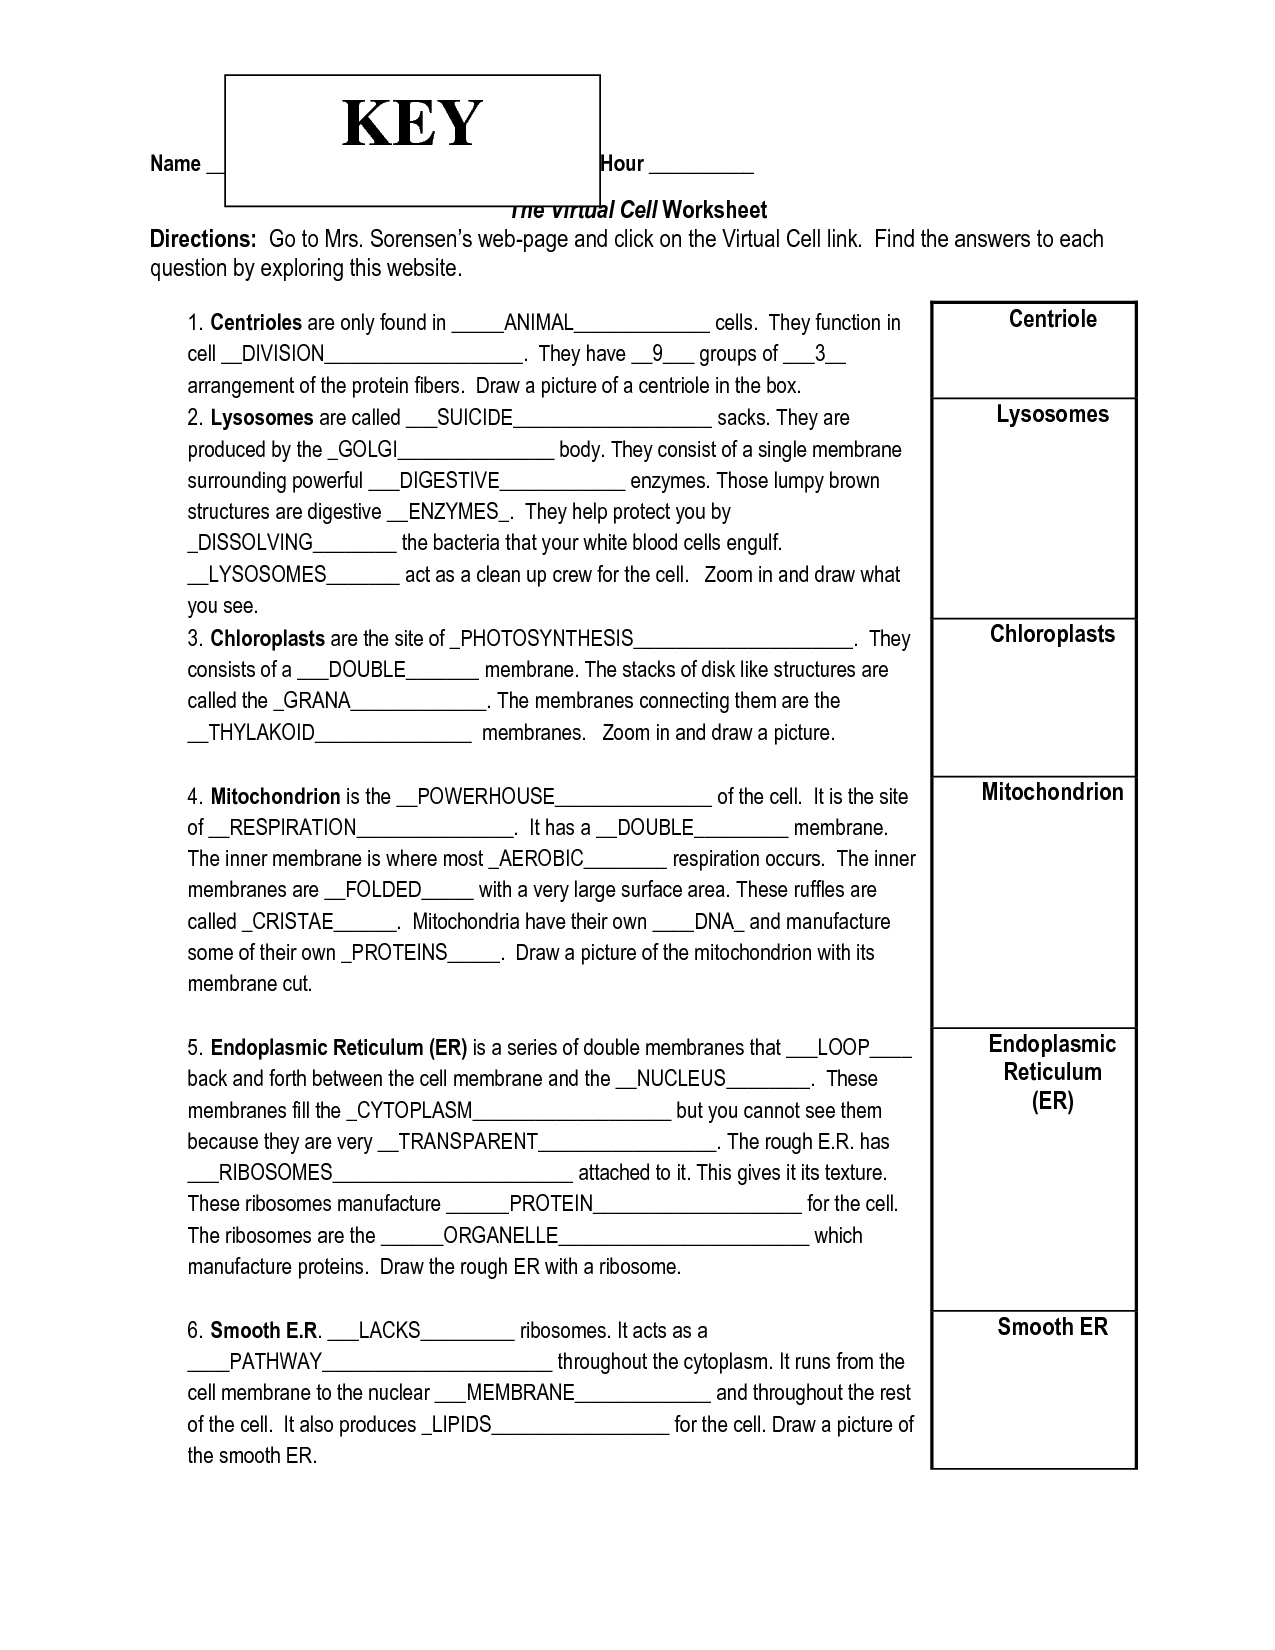 19 Best Images of History Worksheets With Answer Keys - Periodic Table